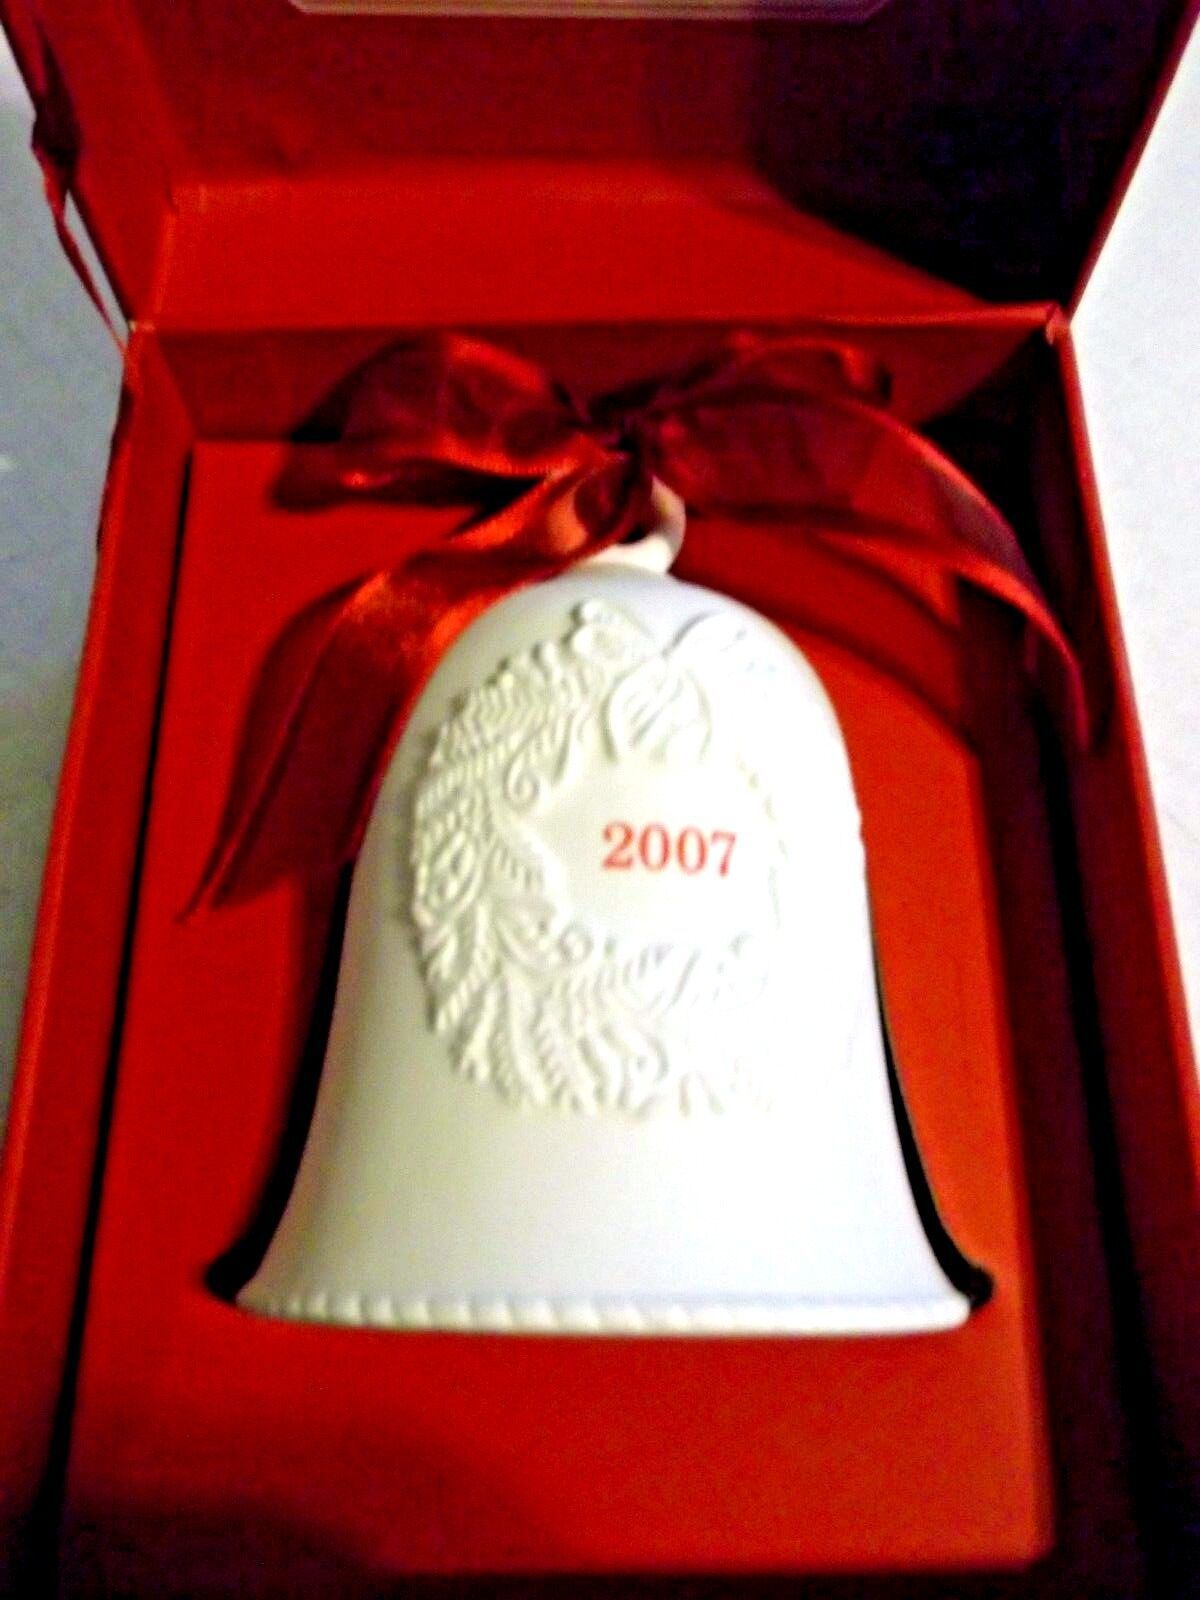 Primary image for Hallmark Porcelain Bell Dated 2007 in Red Box New